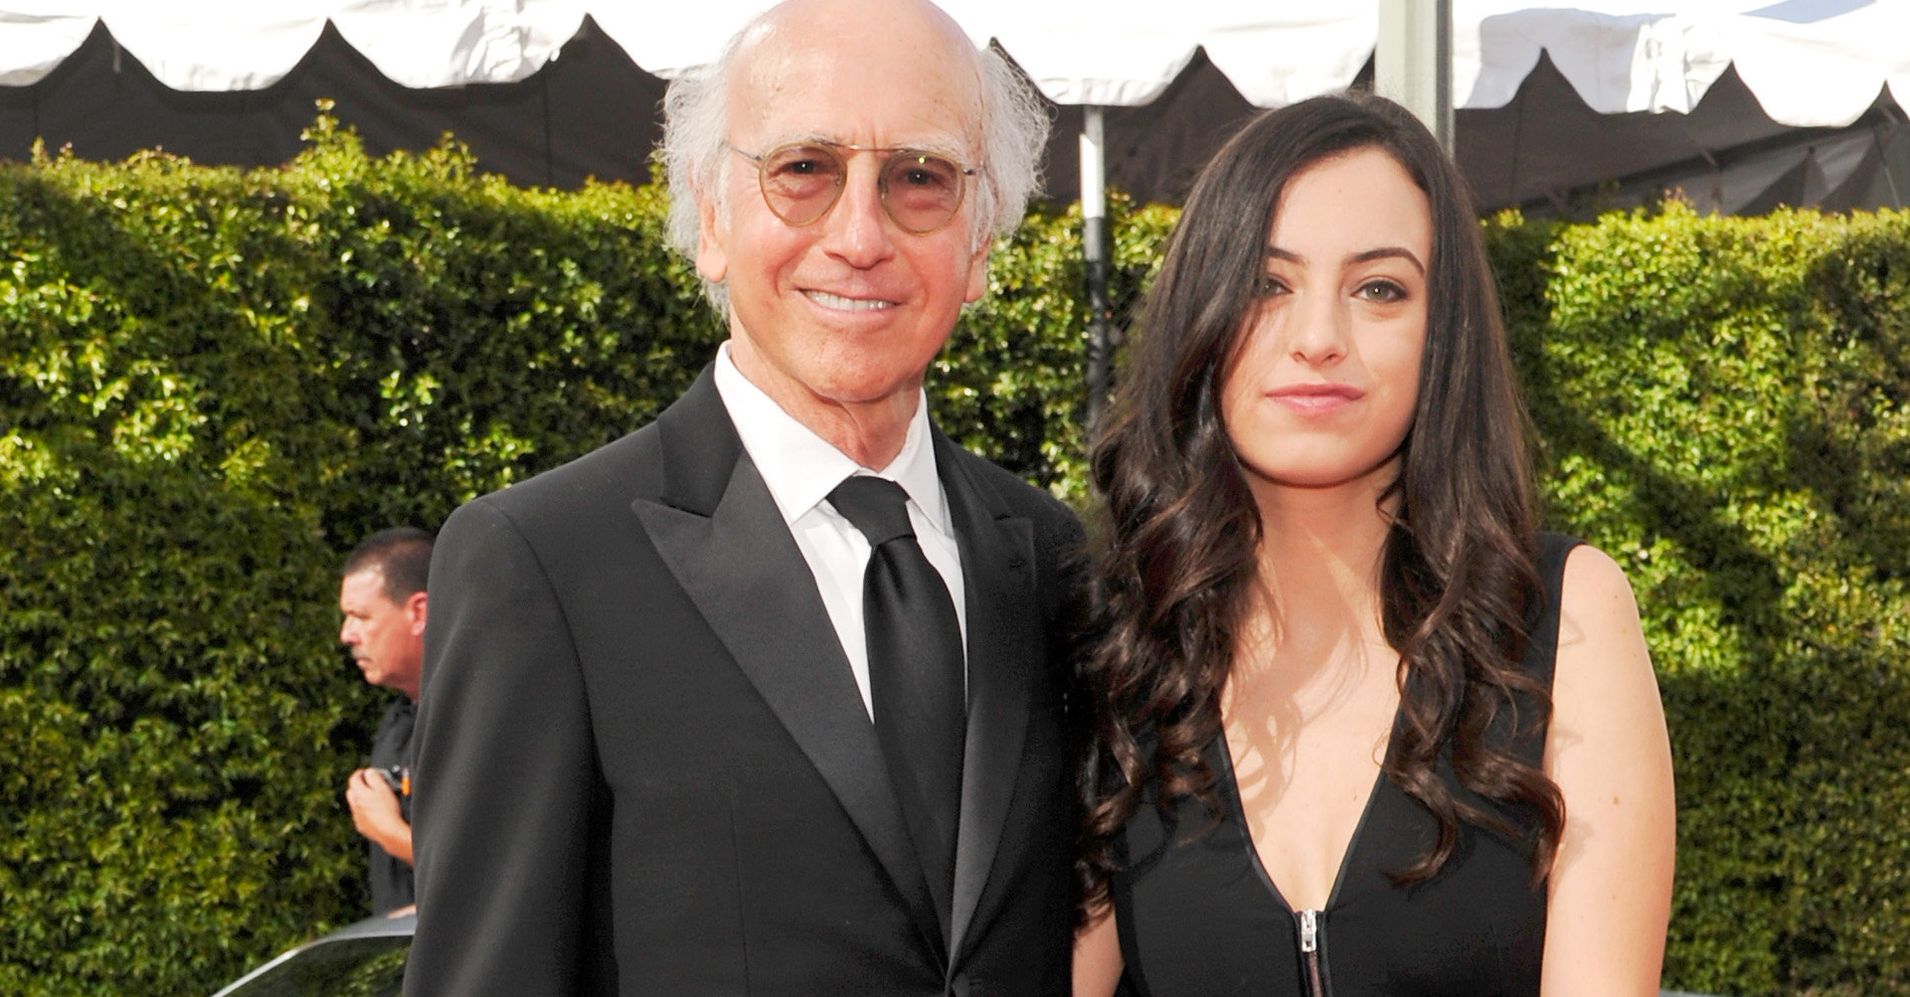 Larry David's Daughter Cazzie's New Web Series Is Like 'Curb' For Millennials | HuffPost